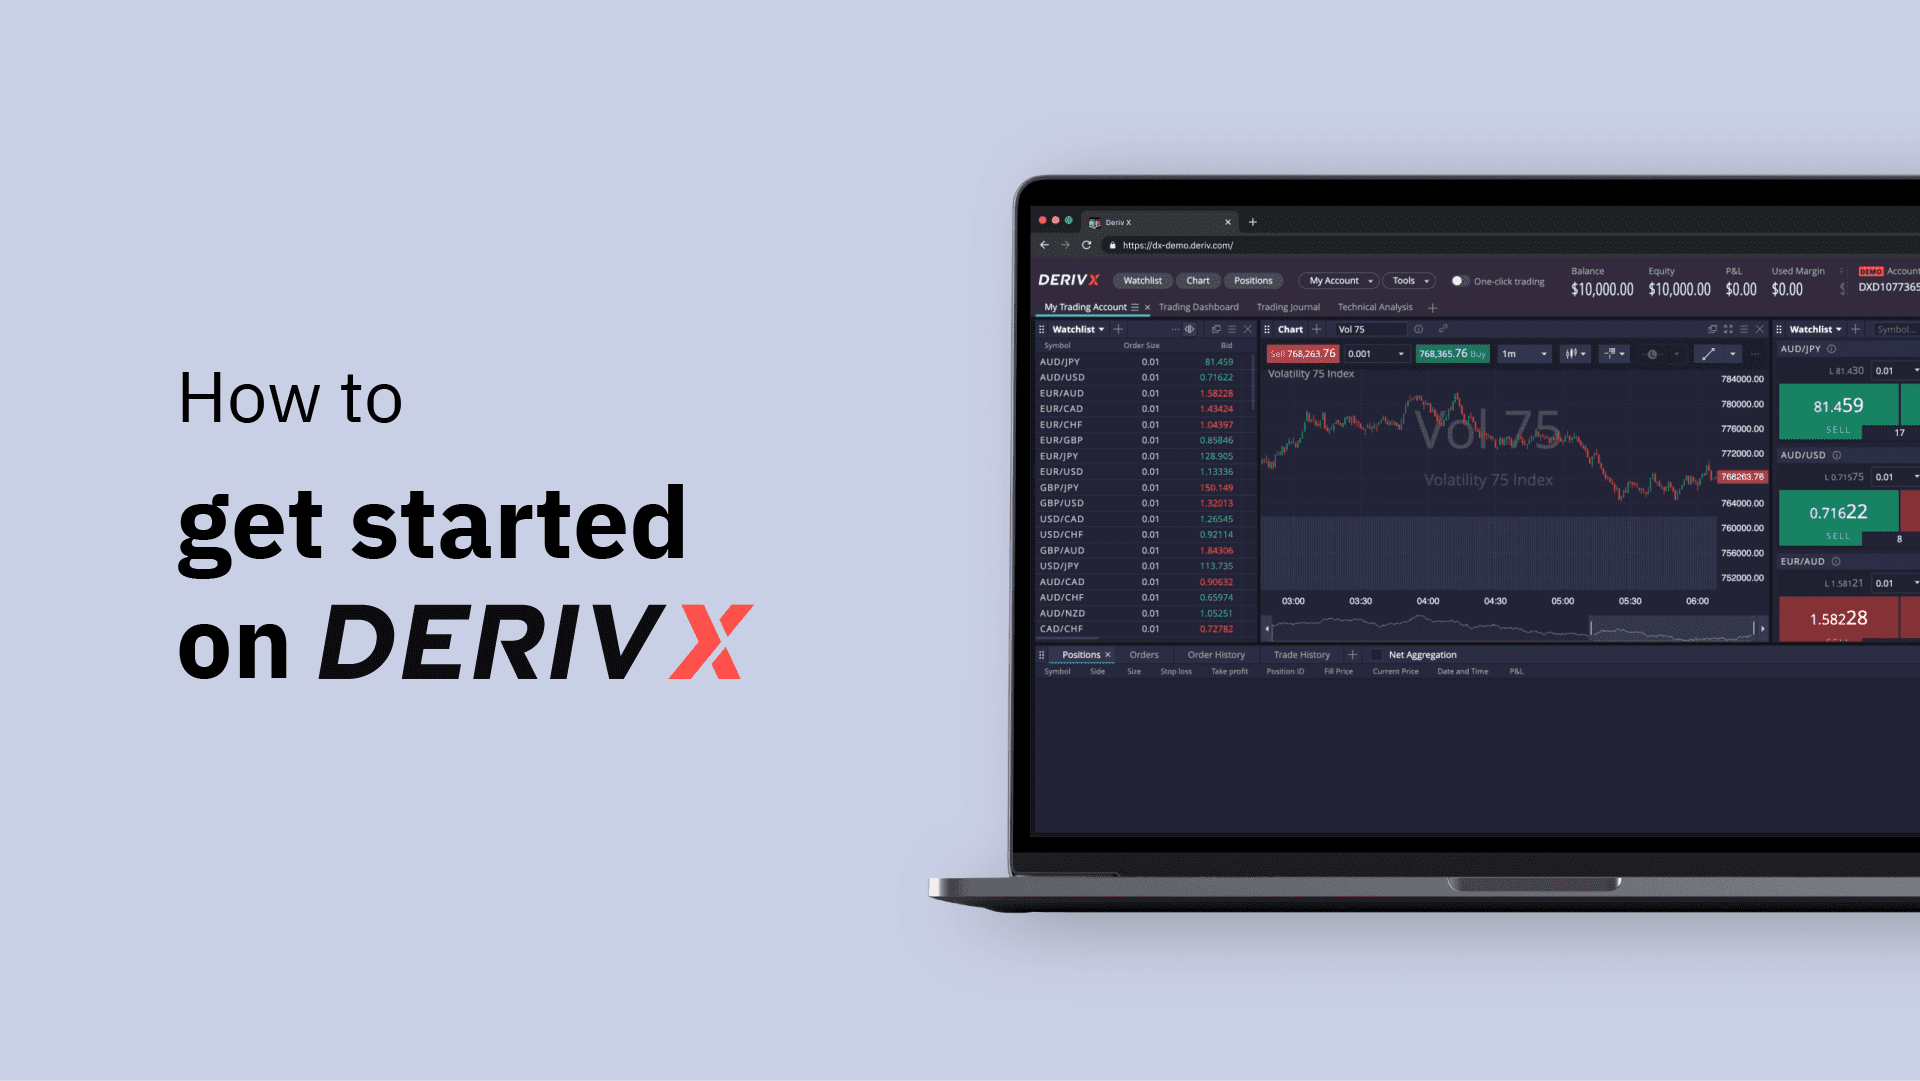 Find out the differences between the account types on Deriv X, and get to know how to create one on mobile and desktop to start trading CFDs.